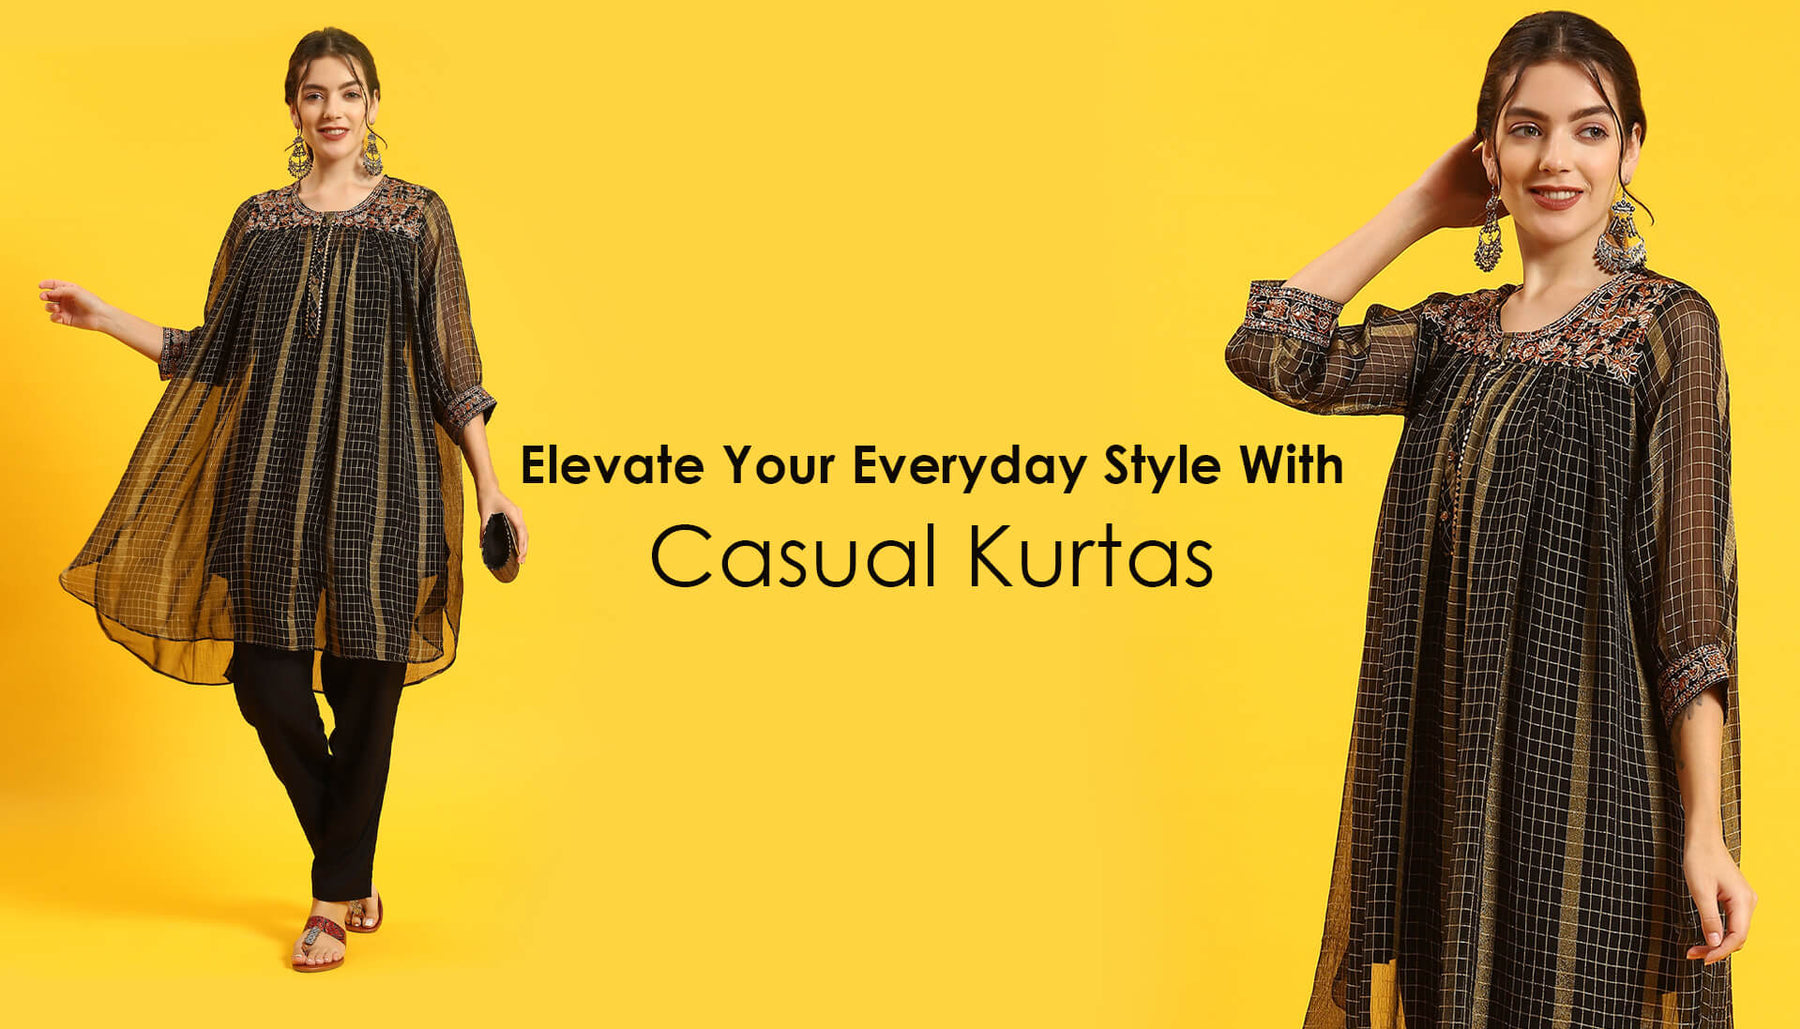 Elevate Your Everyday Style With Casual Kurtas